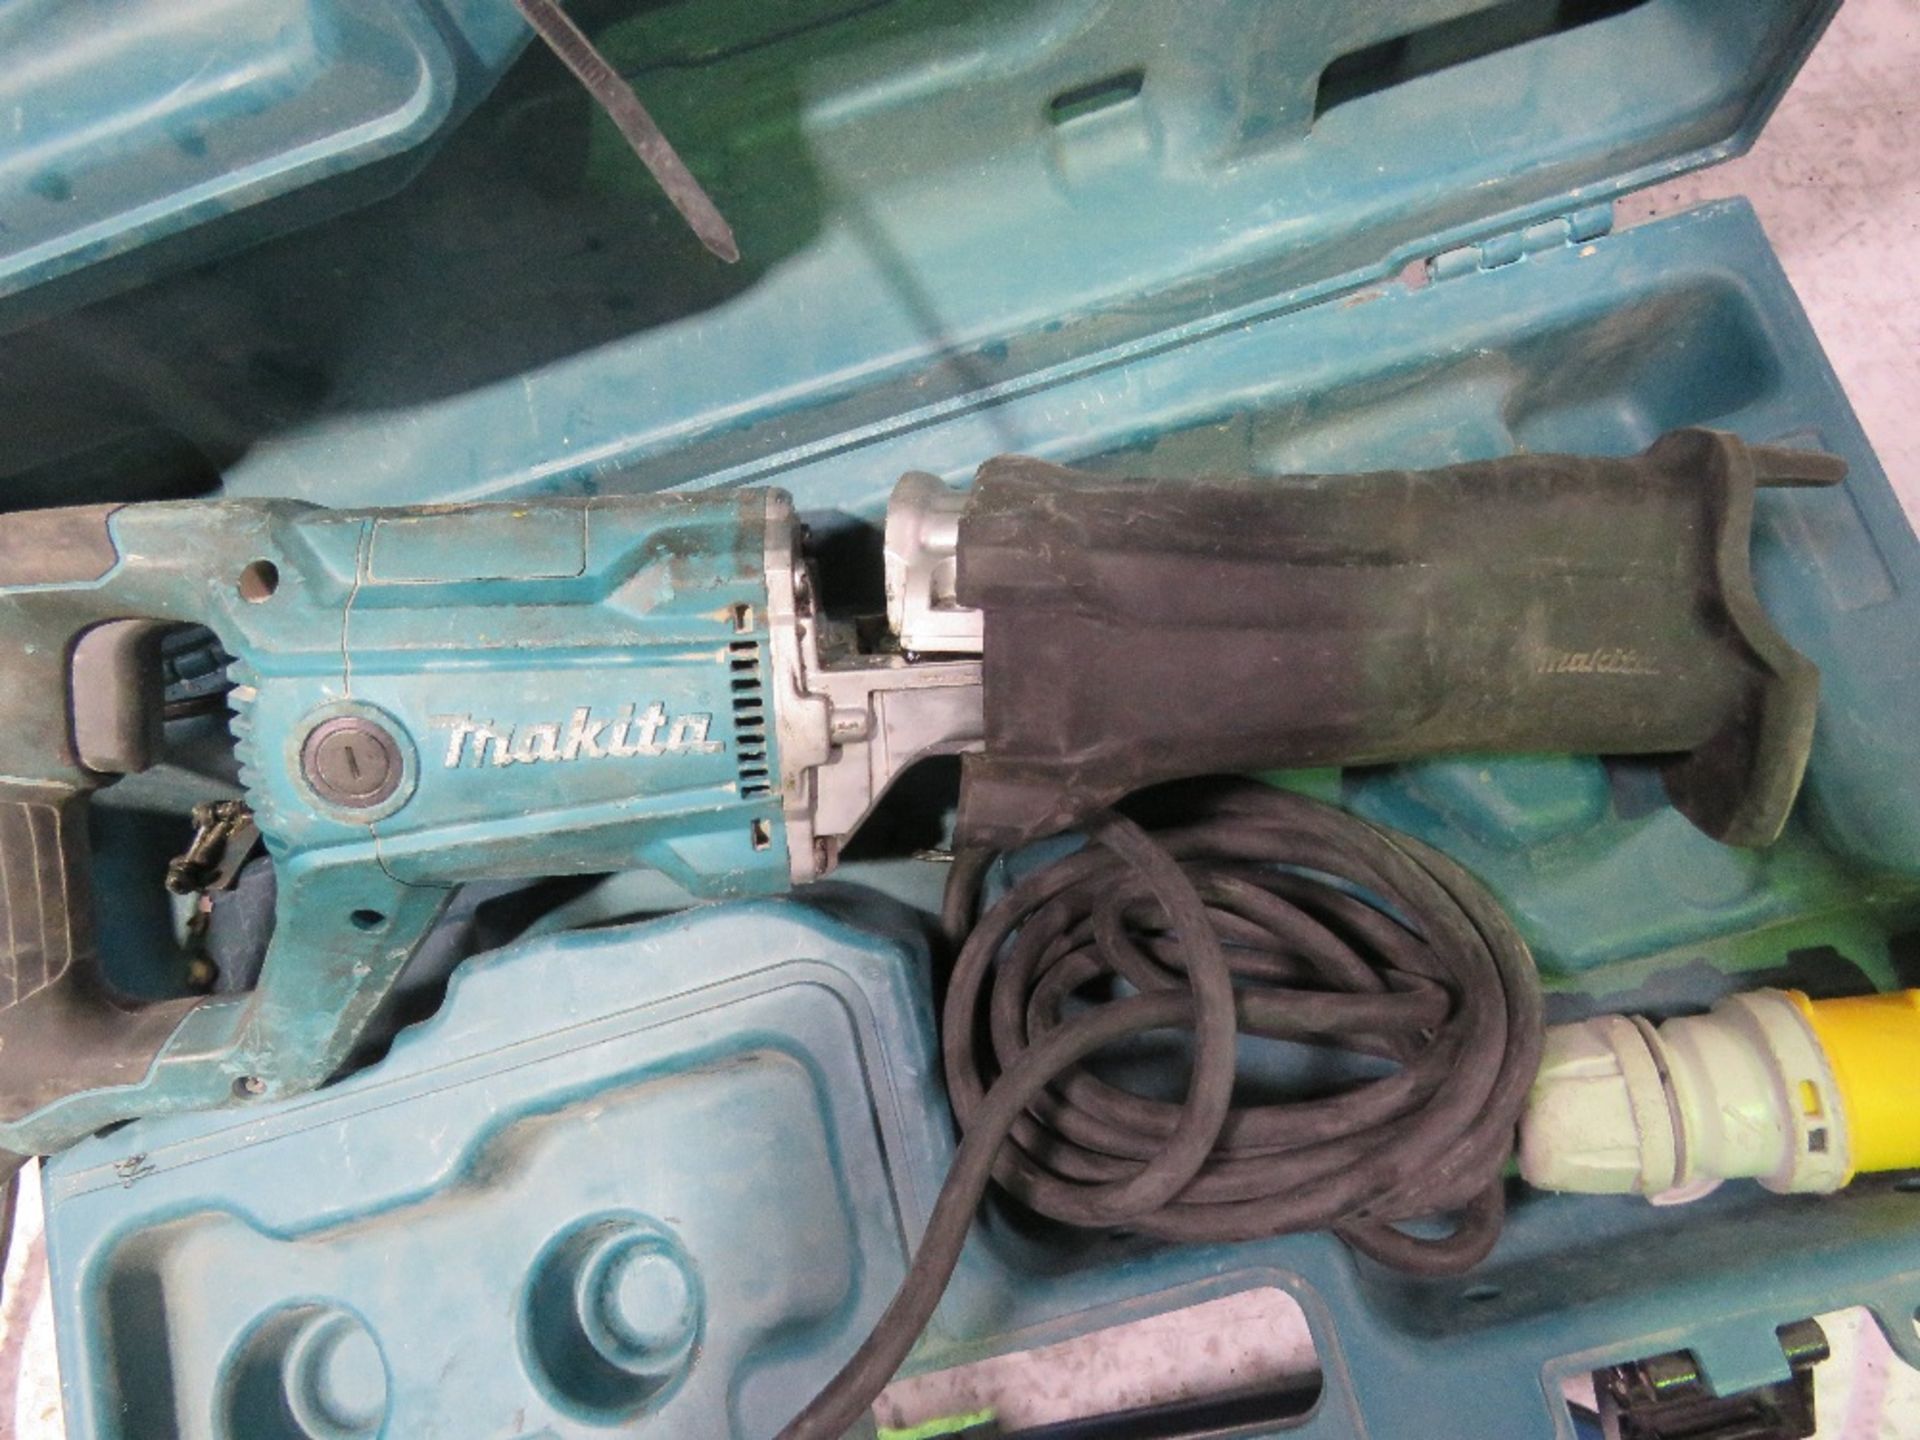 2 X MAKITA 110VOLT POWERED RECIPROCATING SAWS IN CASES THX13911,13944 - Image 4 of 4